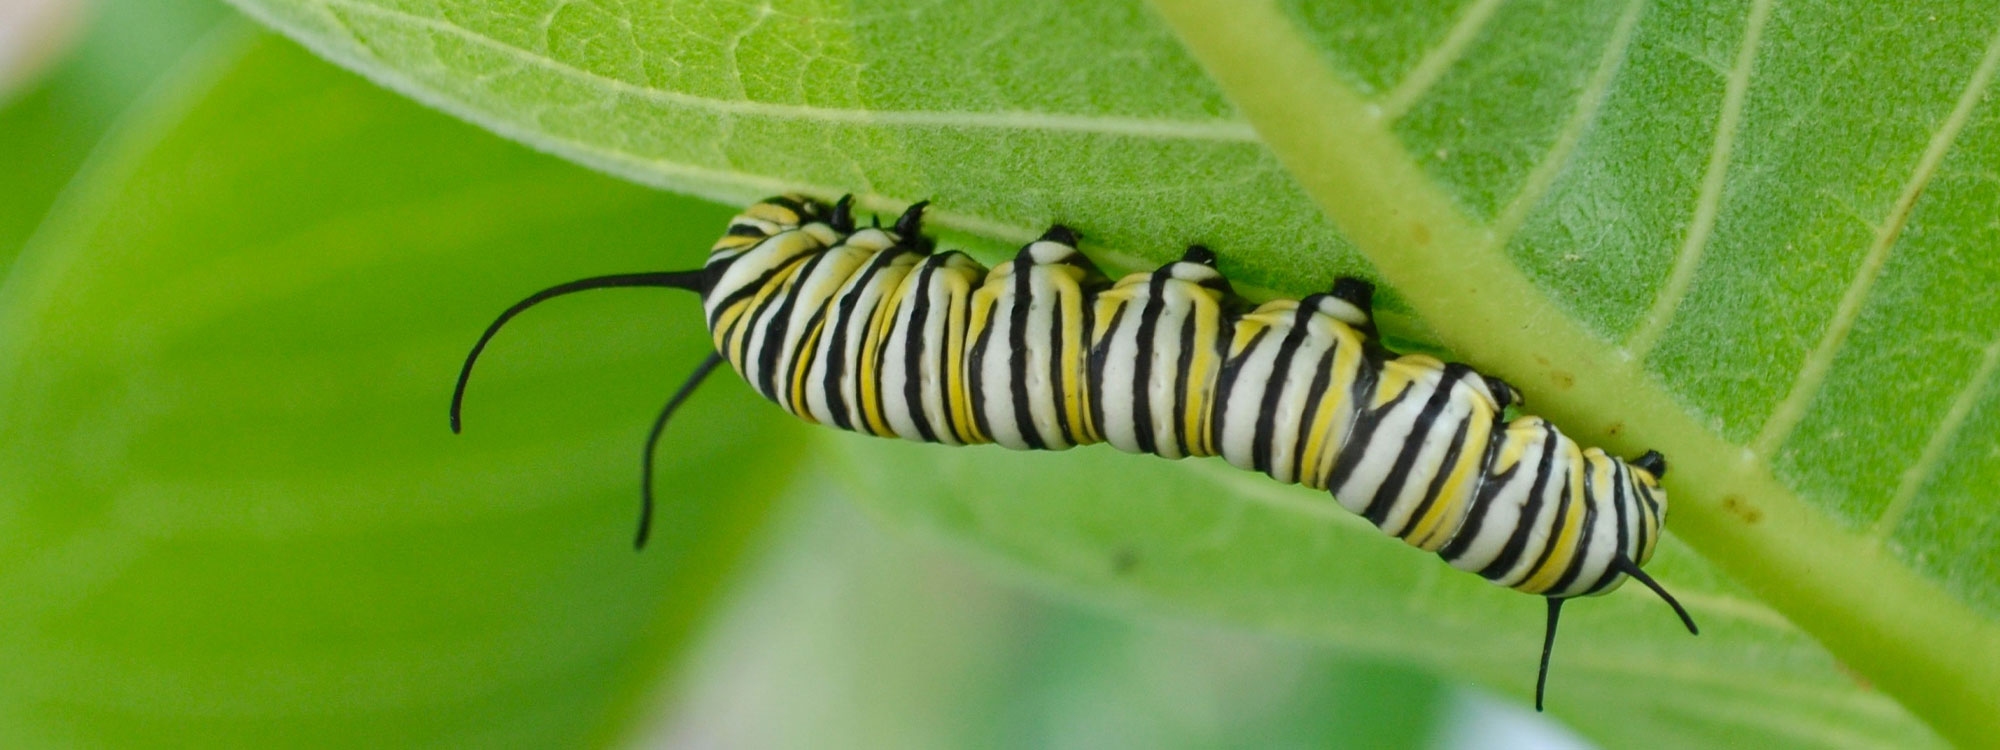 Close-up view of a vibrant Monarch caterpillar gracefully navigating a green leaf